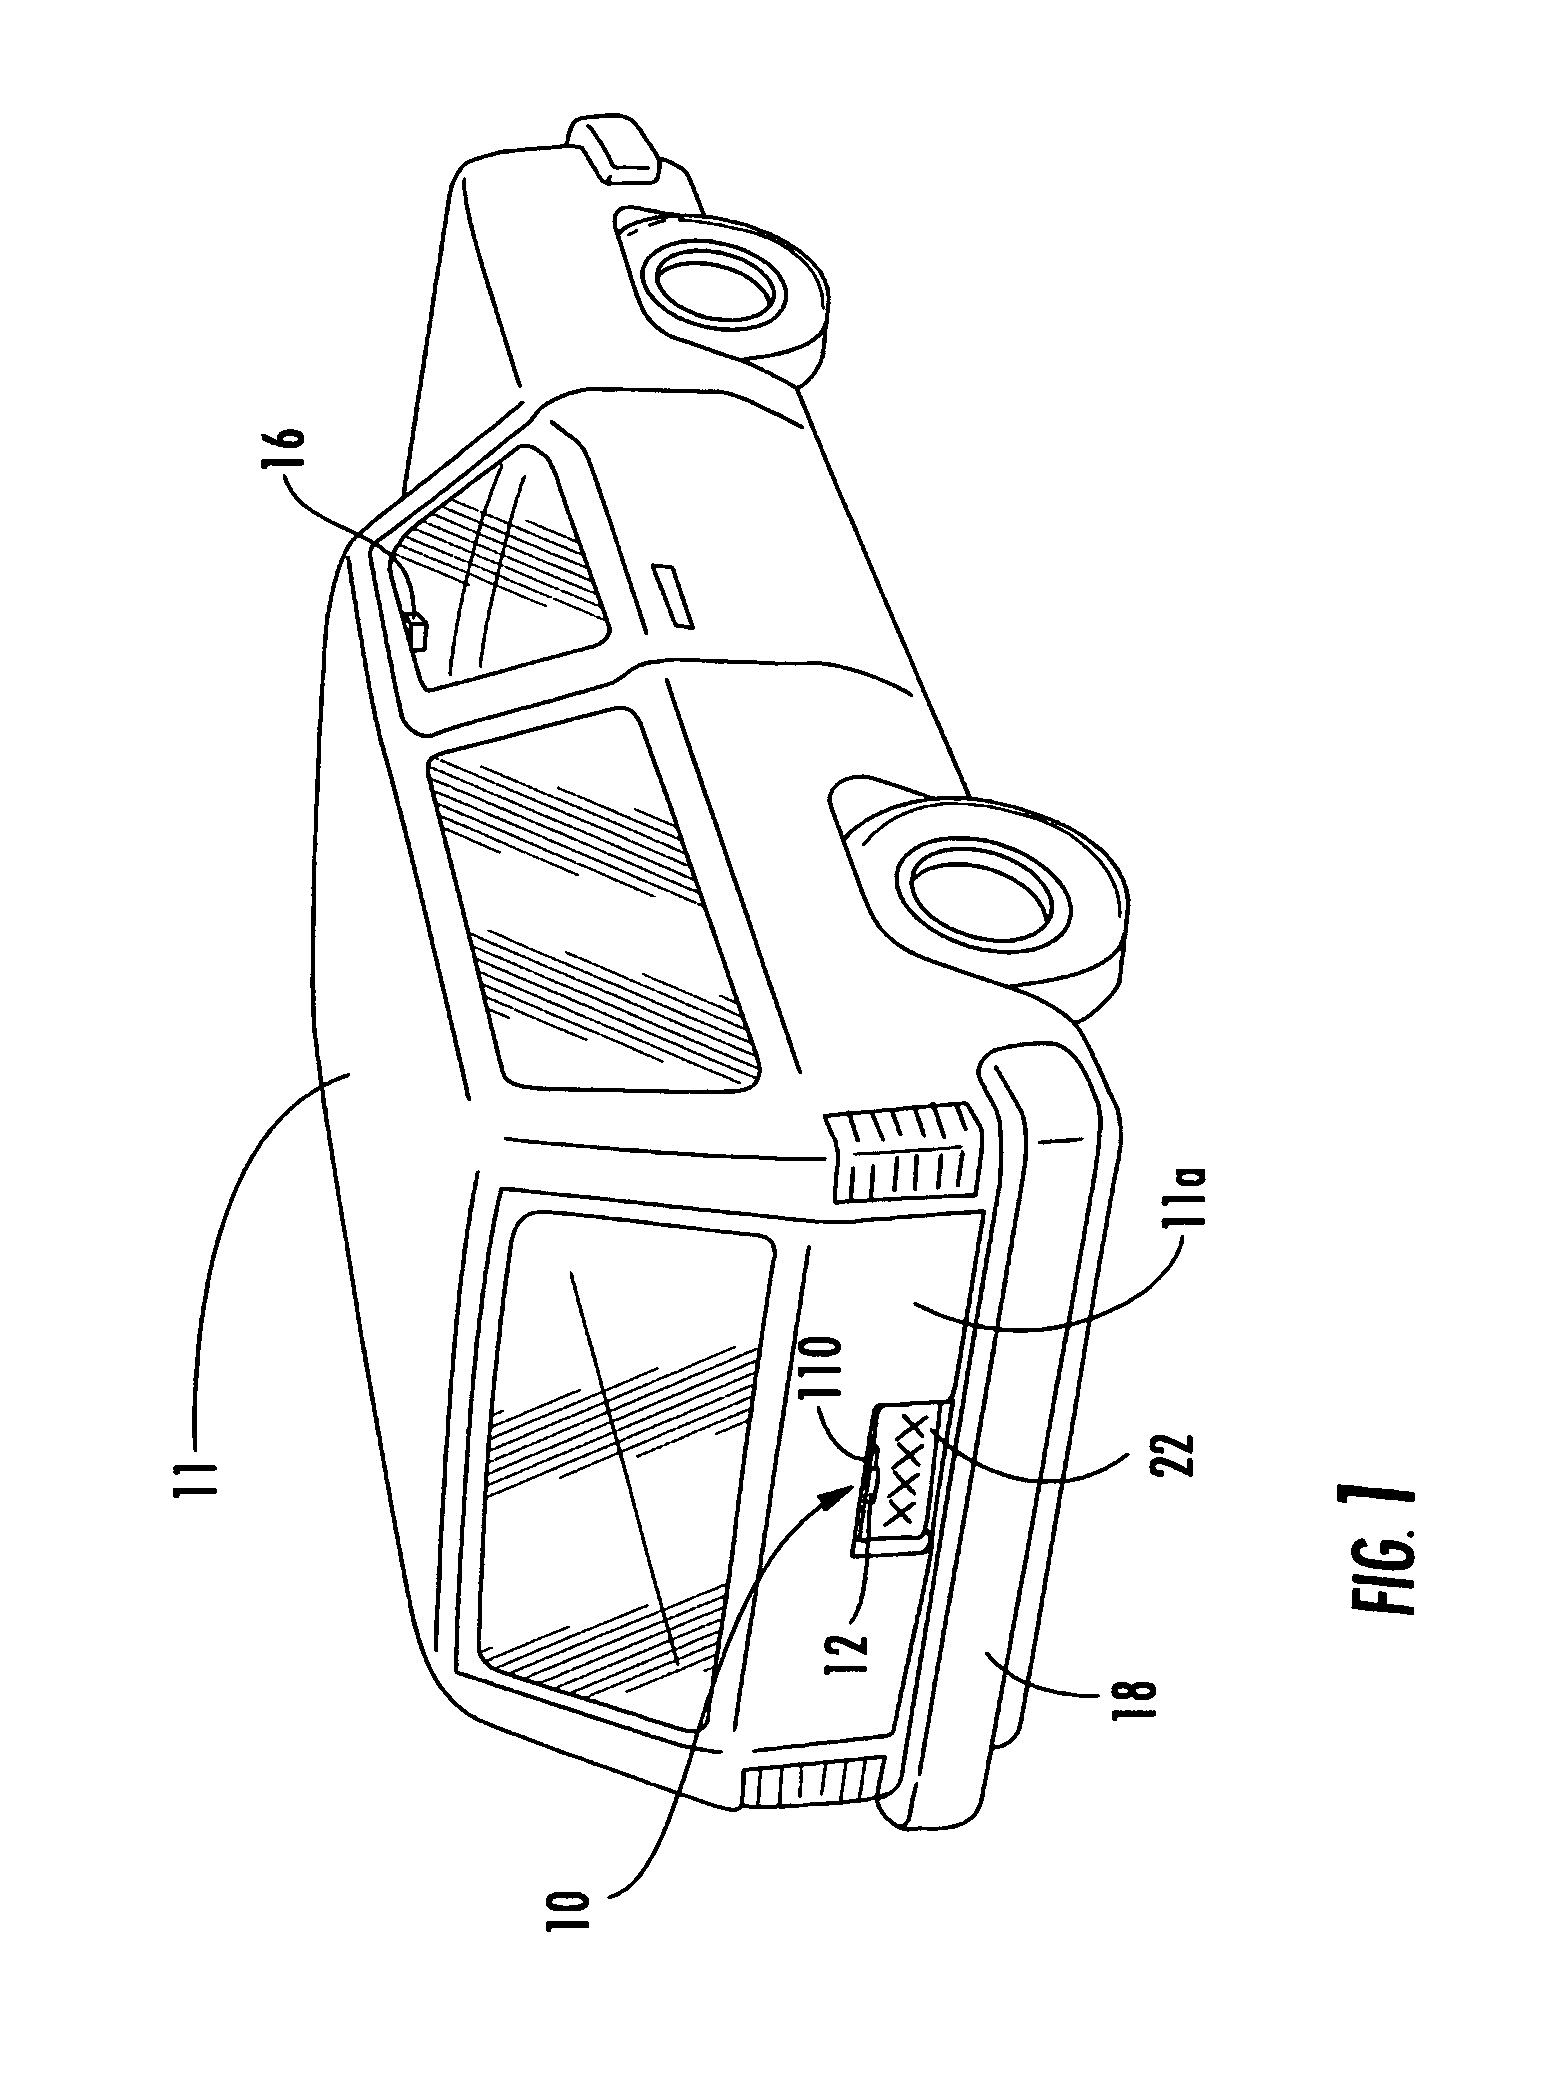 Vehicle imaging system